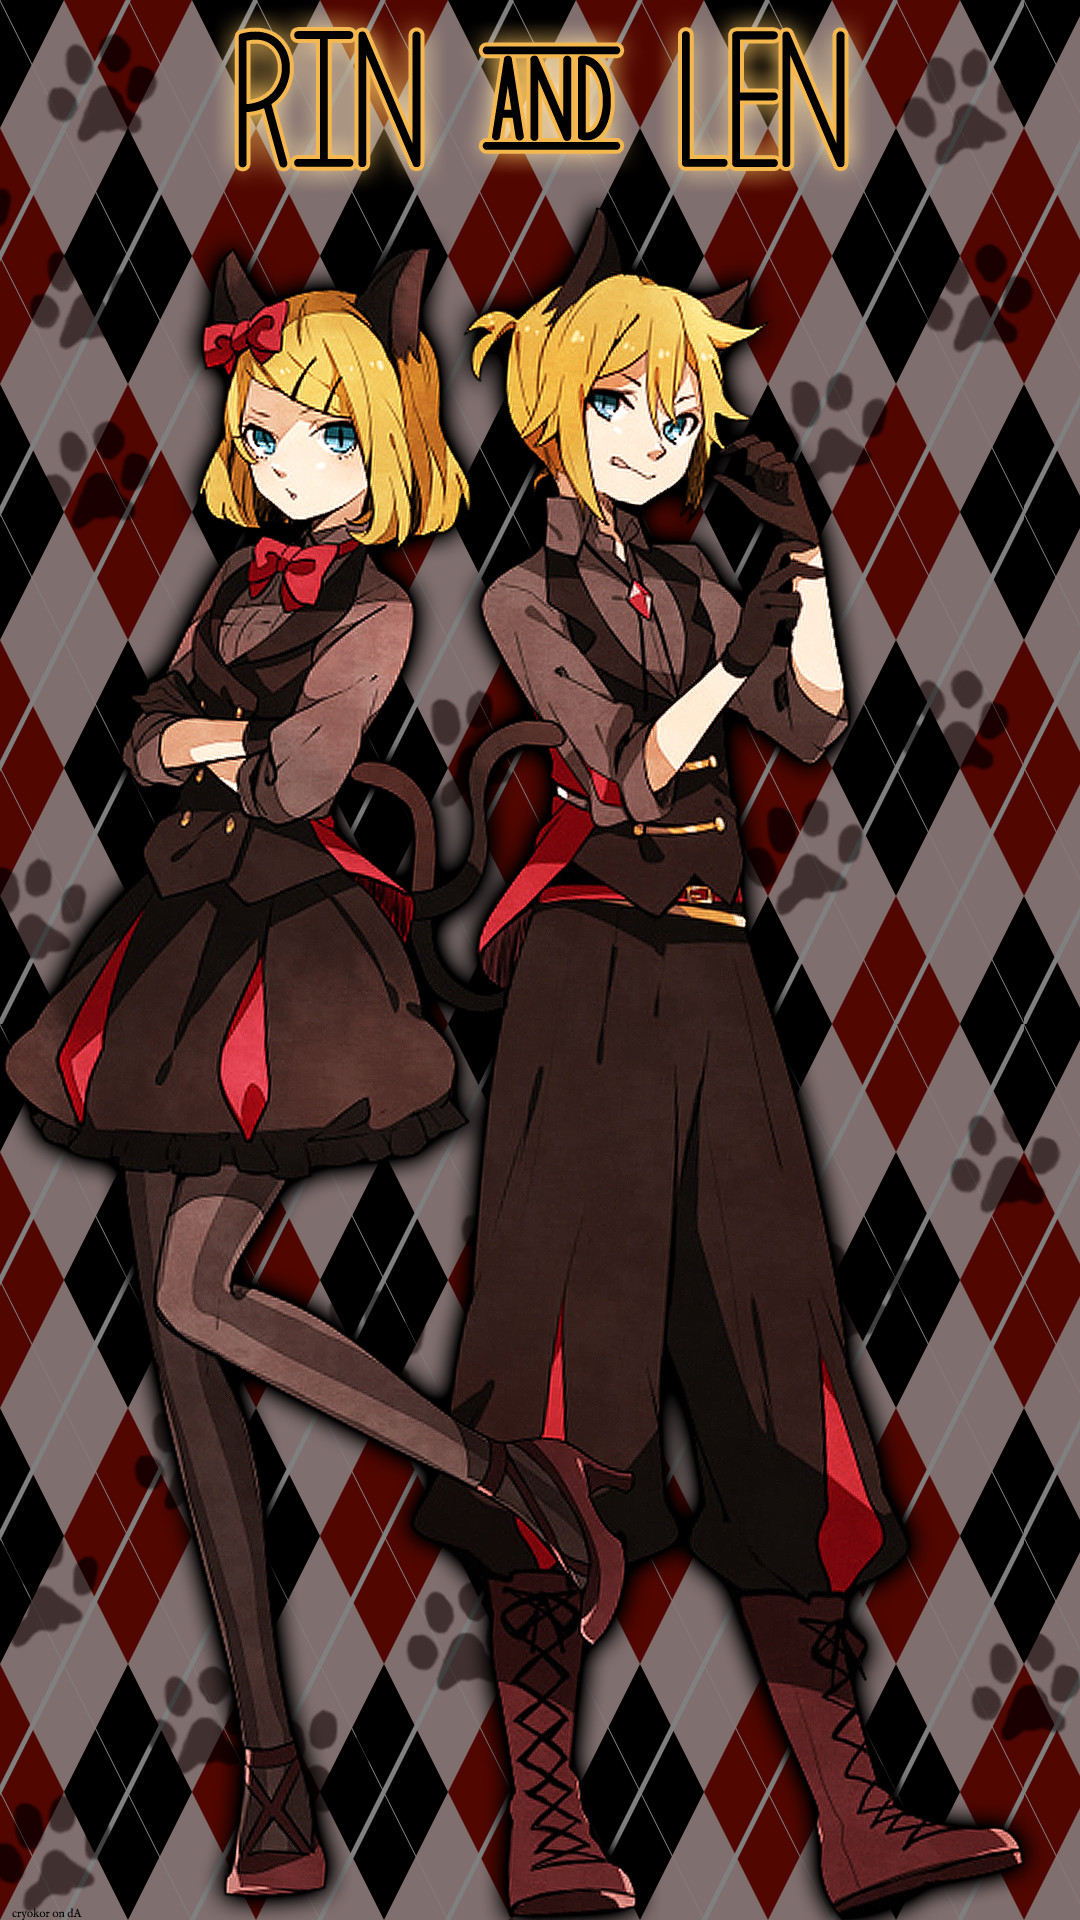 1080x1920 ... [Kagamine Rin and Len] iPhone 6 PLUS Wallpaper by Cryokor